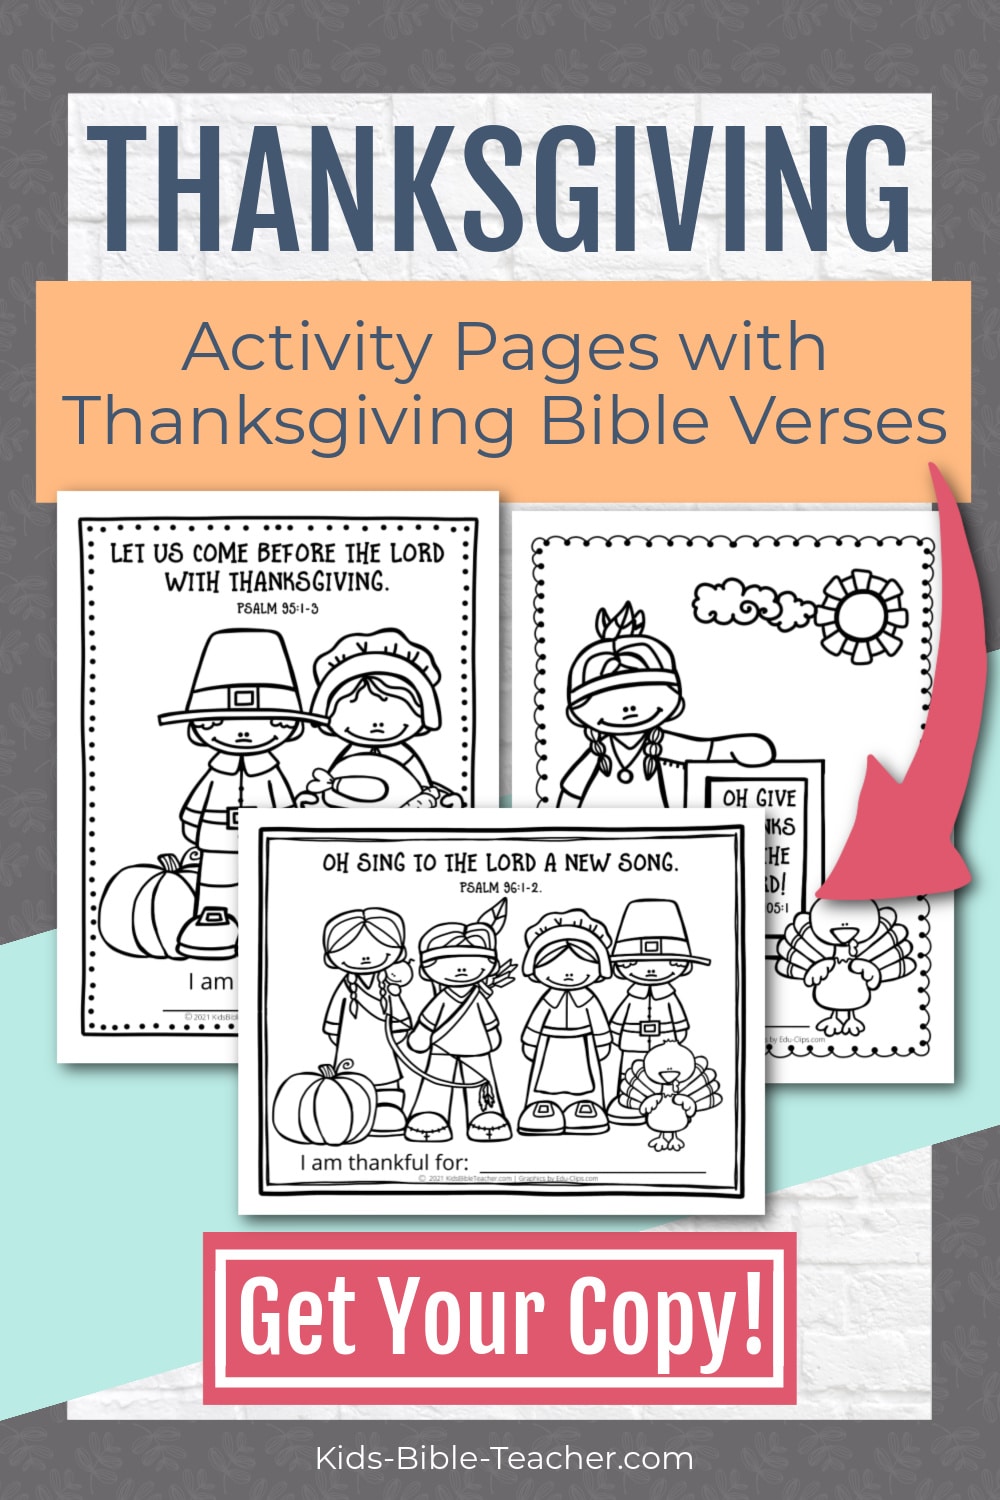 Thanksgiving Coloring Page Activity Page with Thanksgiving Bible Verses